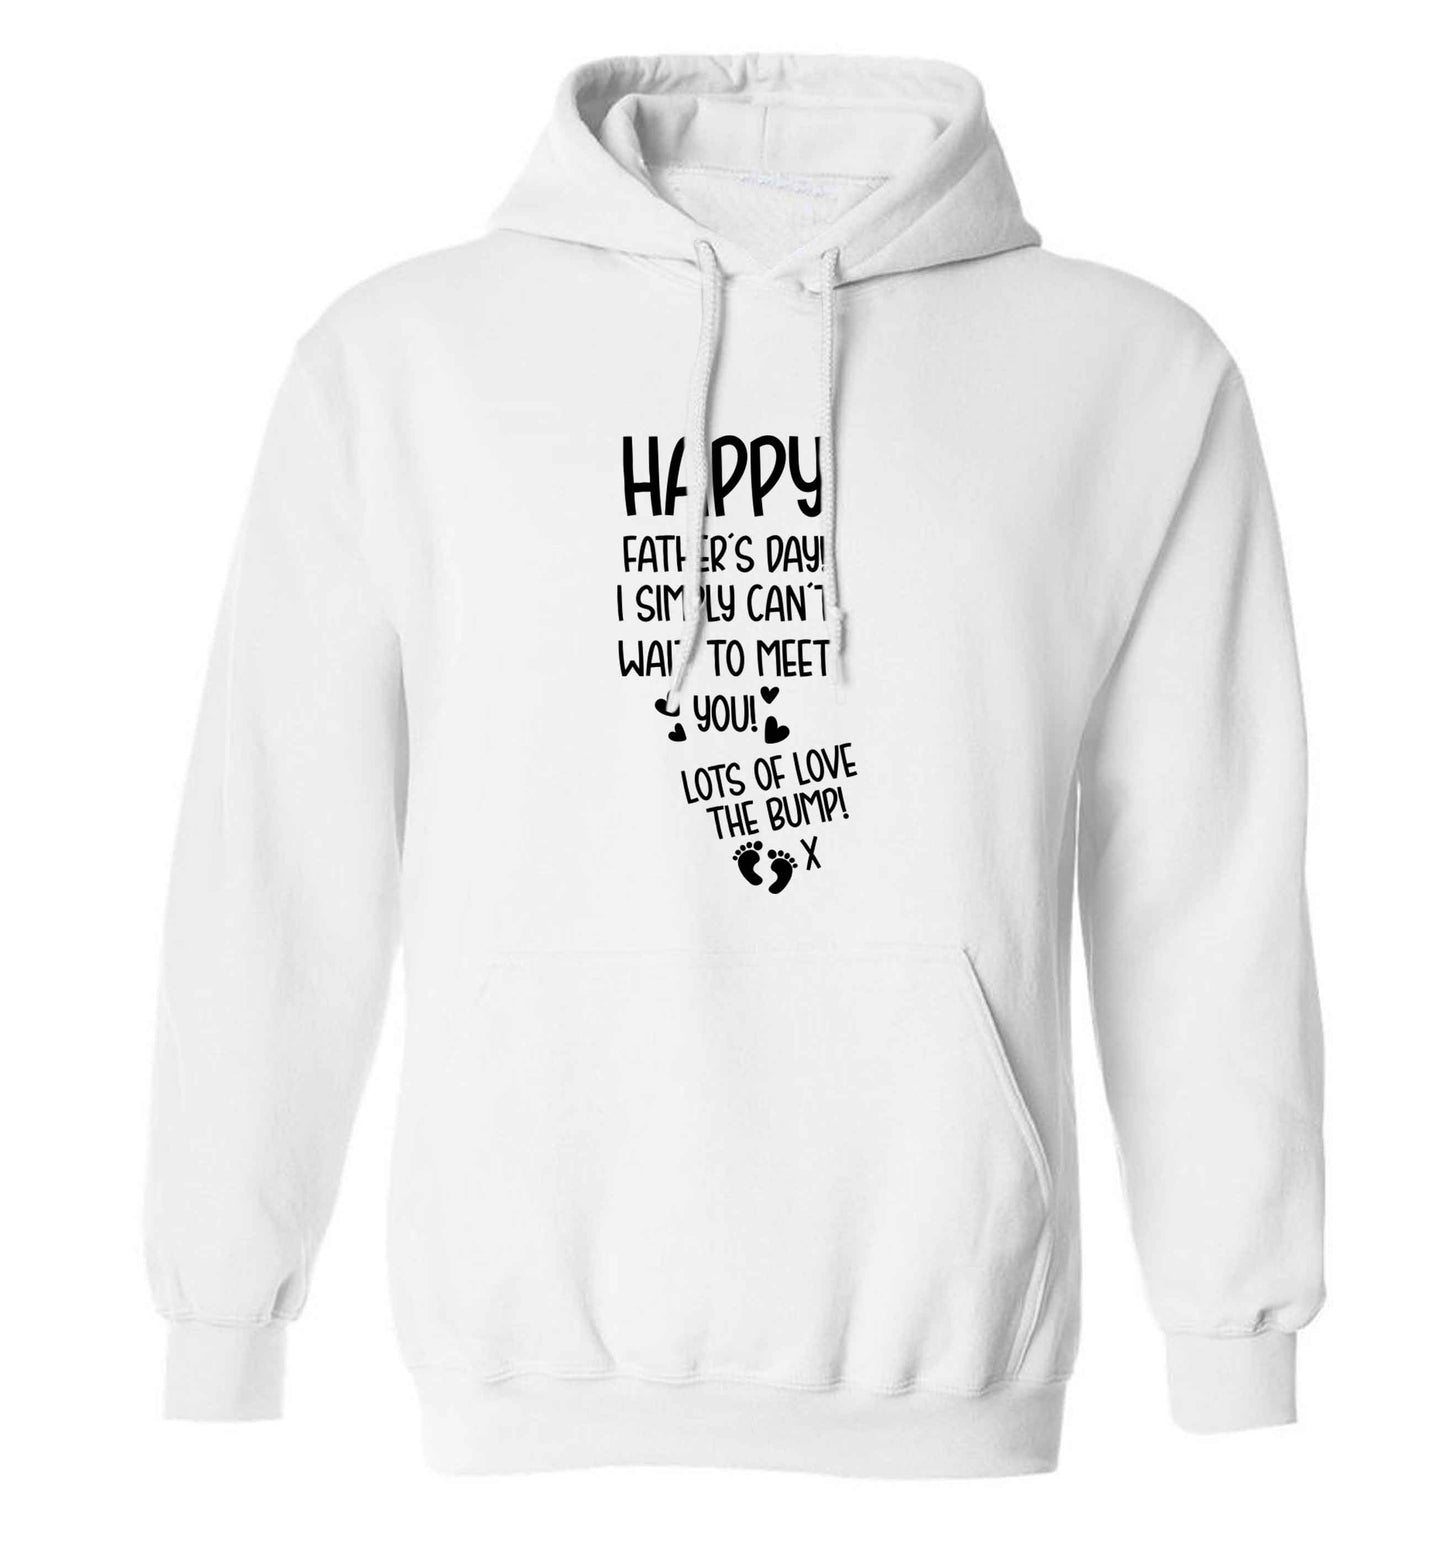 Happy Father's day daddy I can't wait to meet you lot's of love the bump! adults unisex white hoodie 2XL